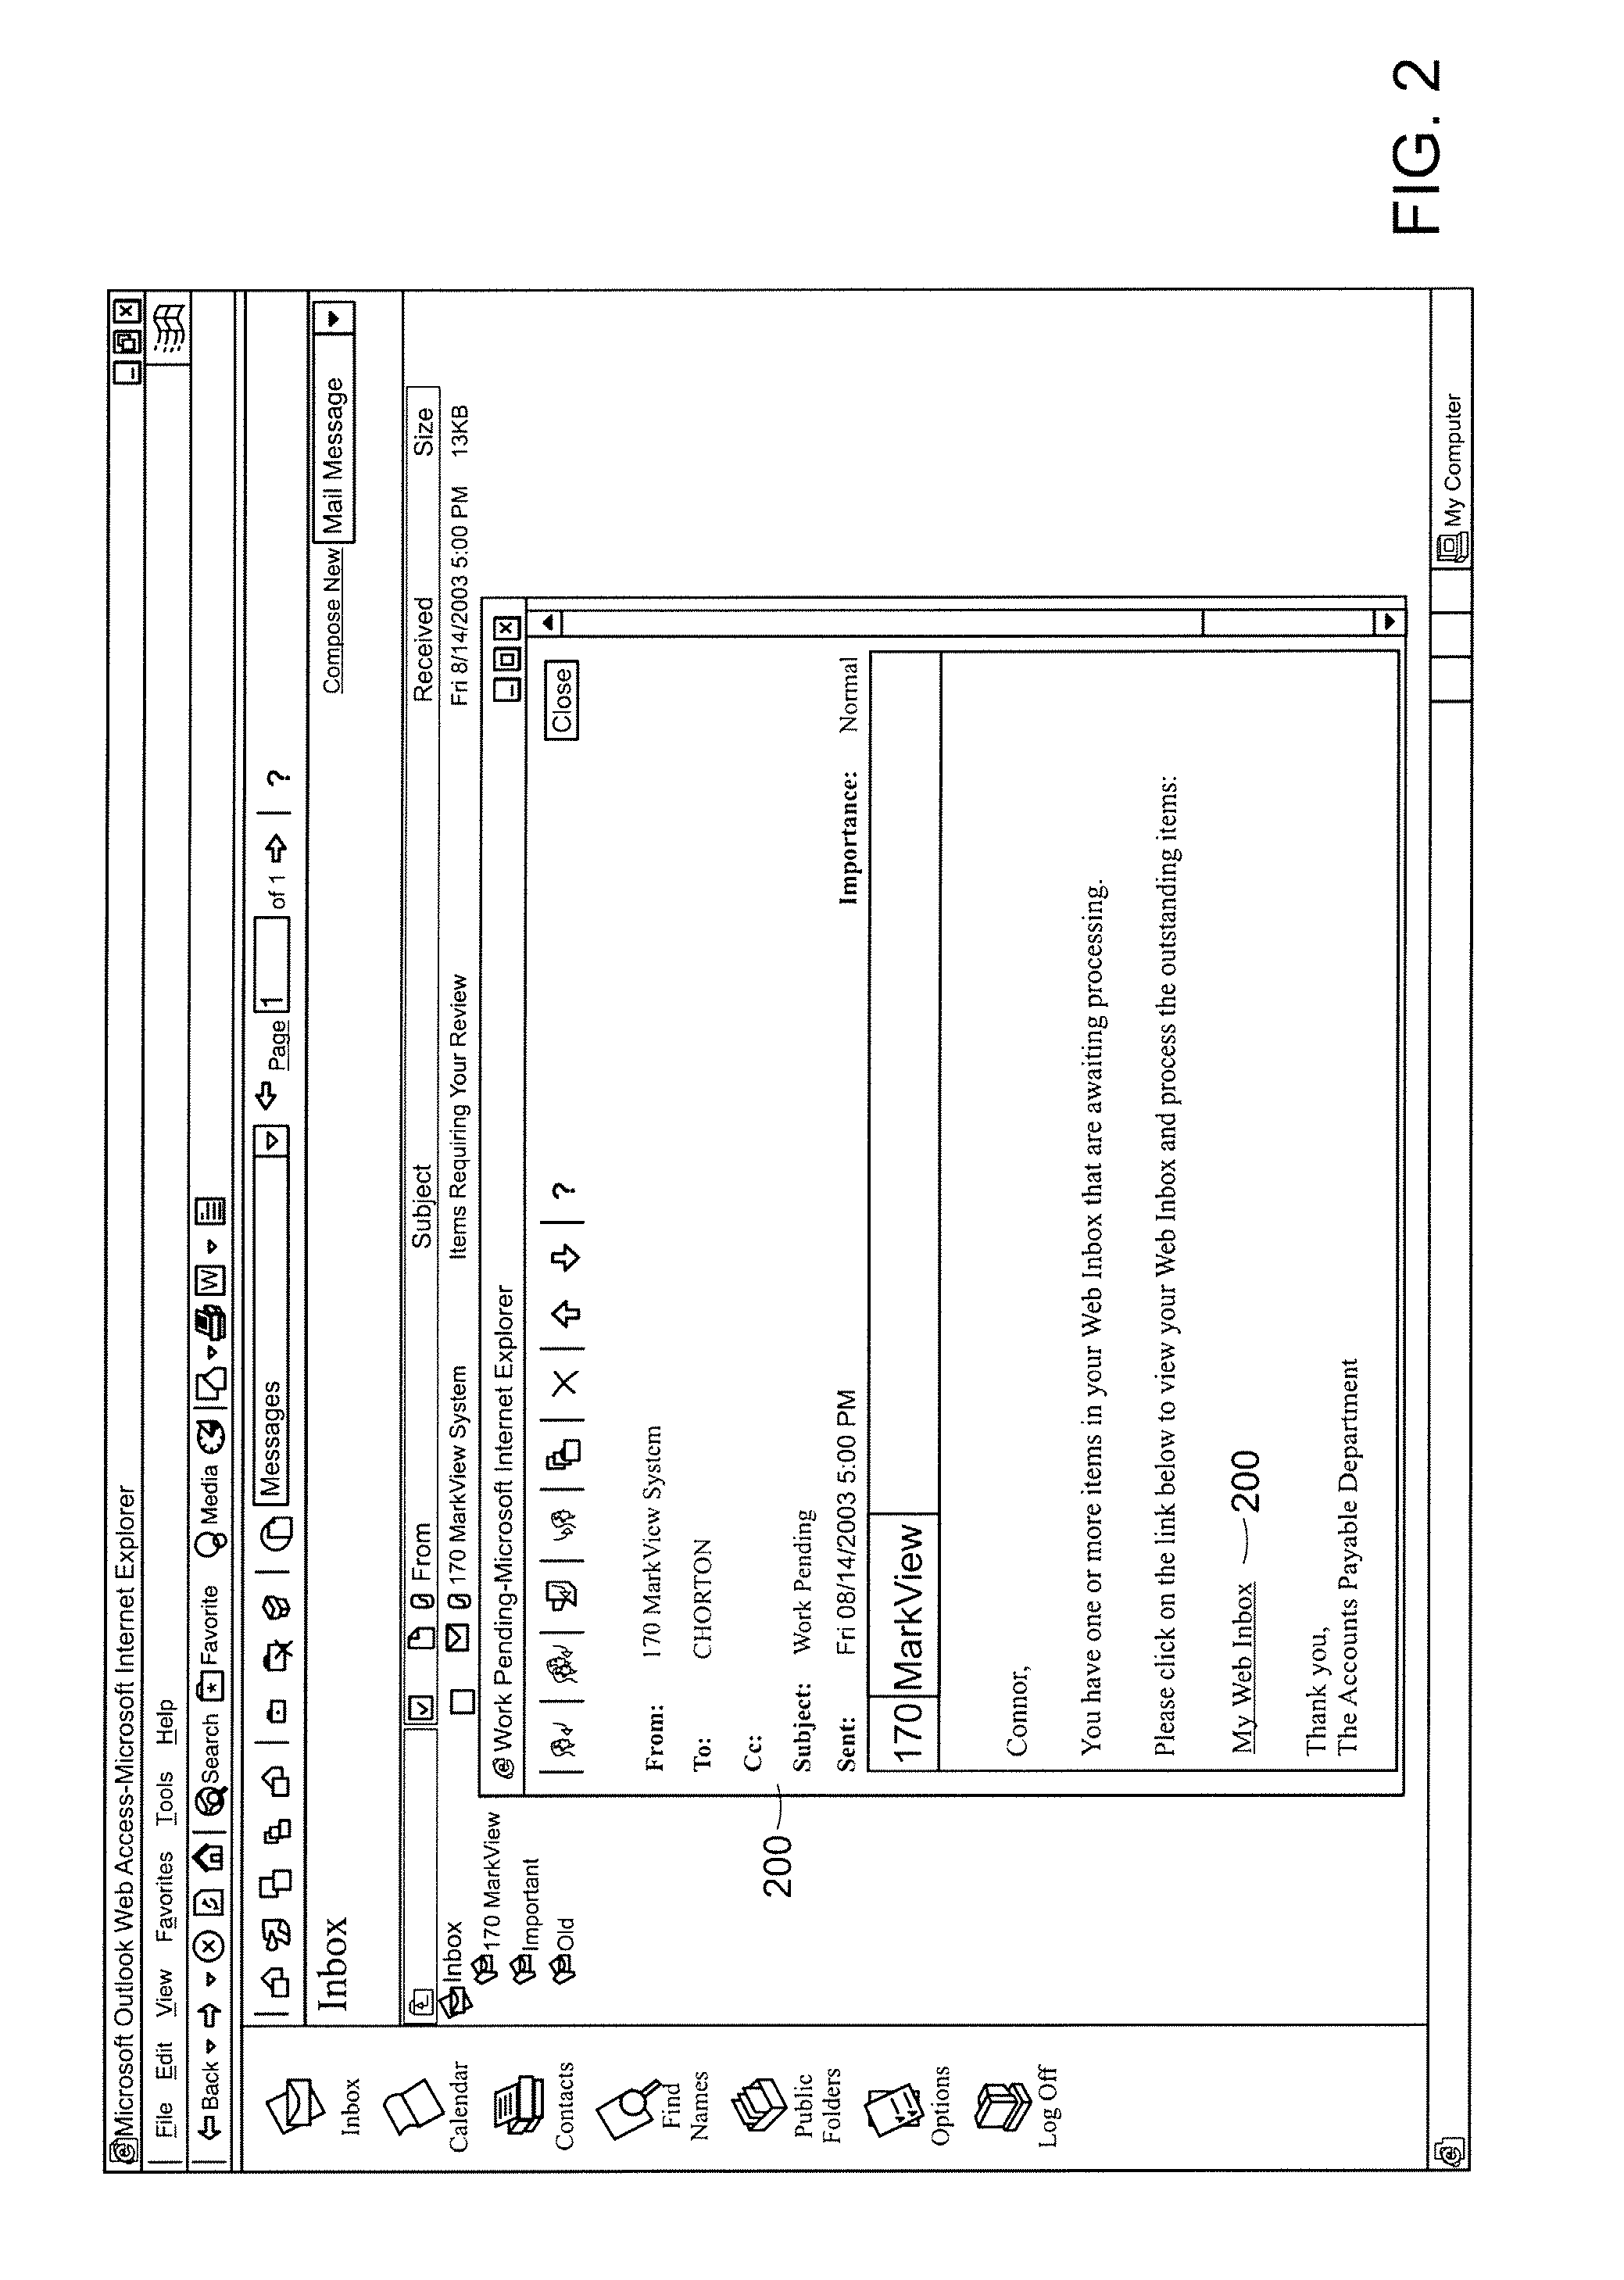 System for and method of providing a user interface for a computer-based software application